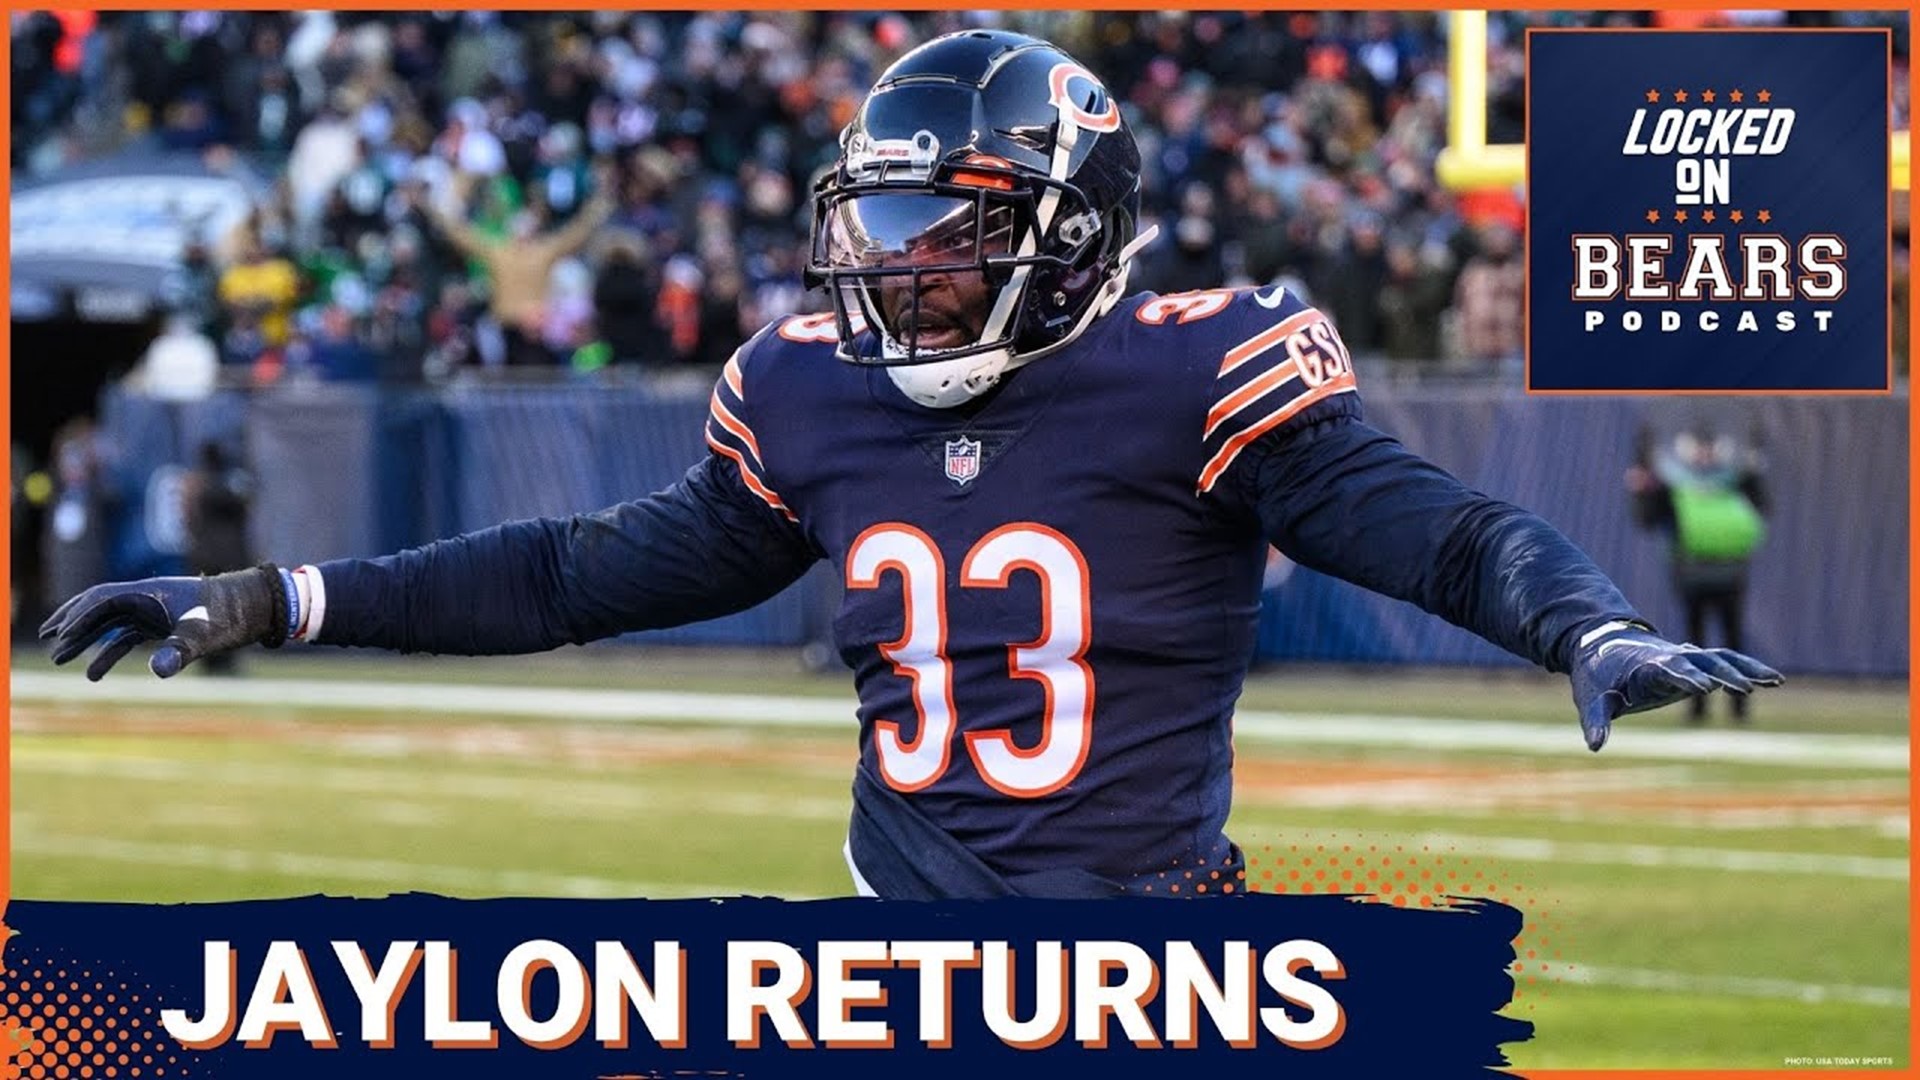 Jaylon Johnson returned to Chicago Bears voluntary OTAs, ending all of the baseless speculation about a contract dispute or holdout.